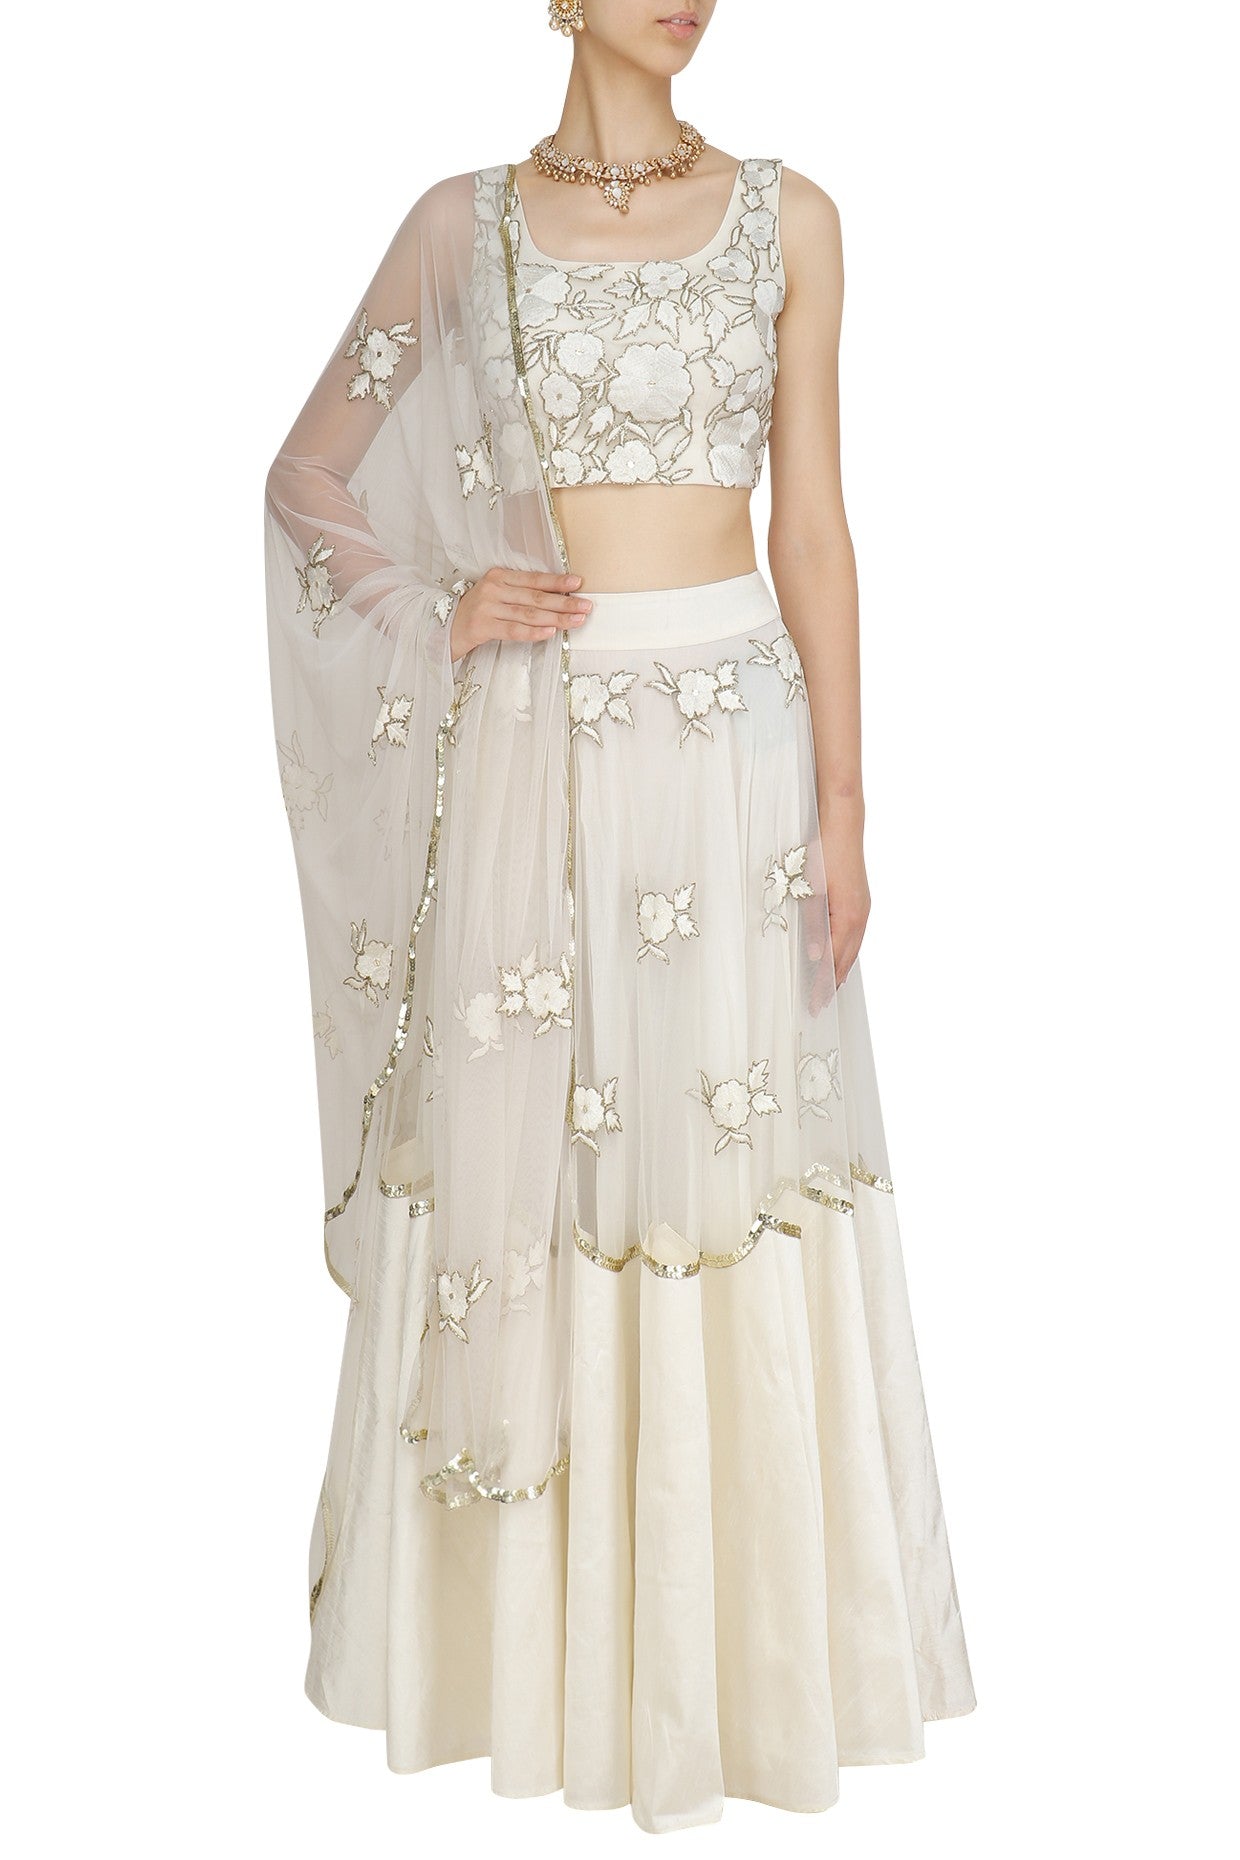 Creme Bloom Lehenga Set - Indian Clothing in Denver, CO, Aurora, CO, Boulder, CO, Fort Collins, CO, Colorado Springs, CO, Parker, CO, Highlands Ranch, CO, Cherry Creek, CO, Centennial, CO, and Longmont, CO. Nationwide shipping USA - India Fashion X